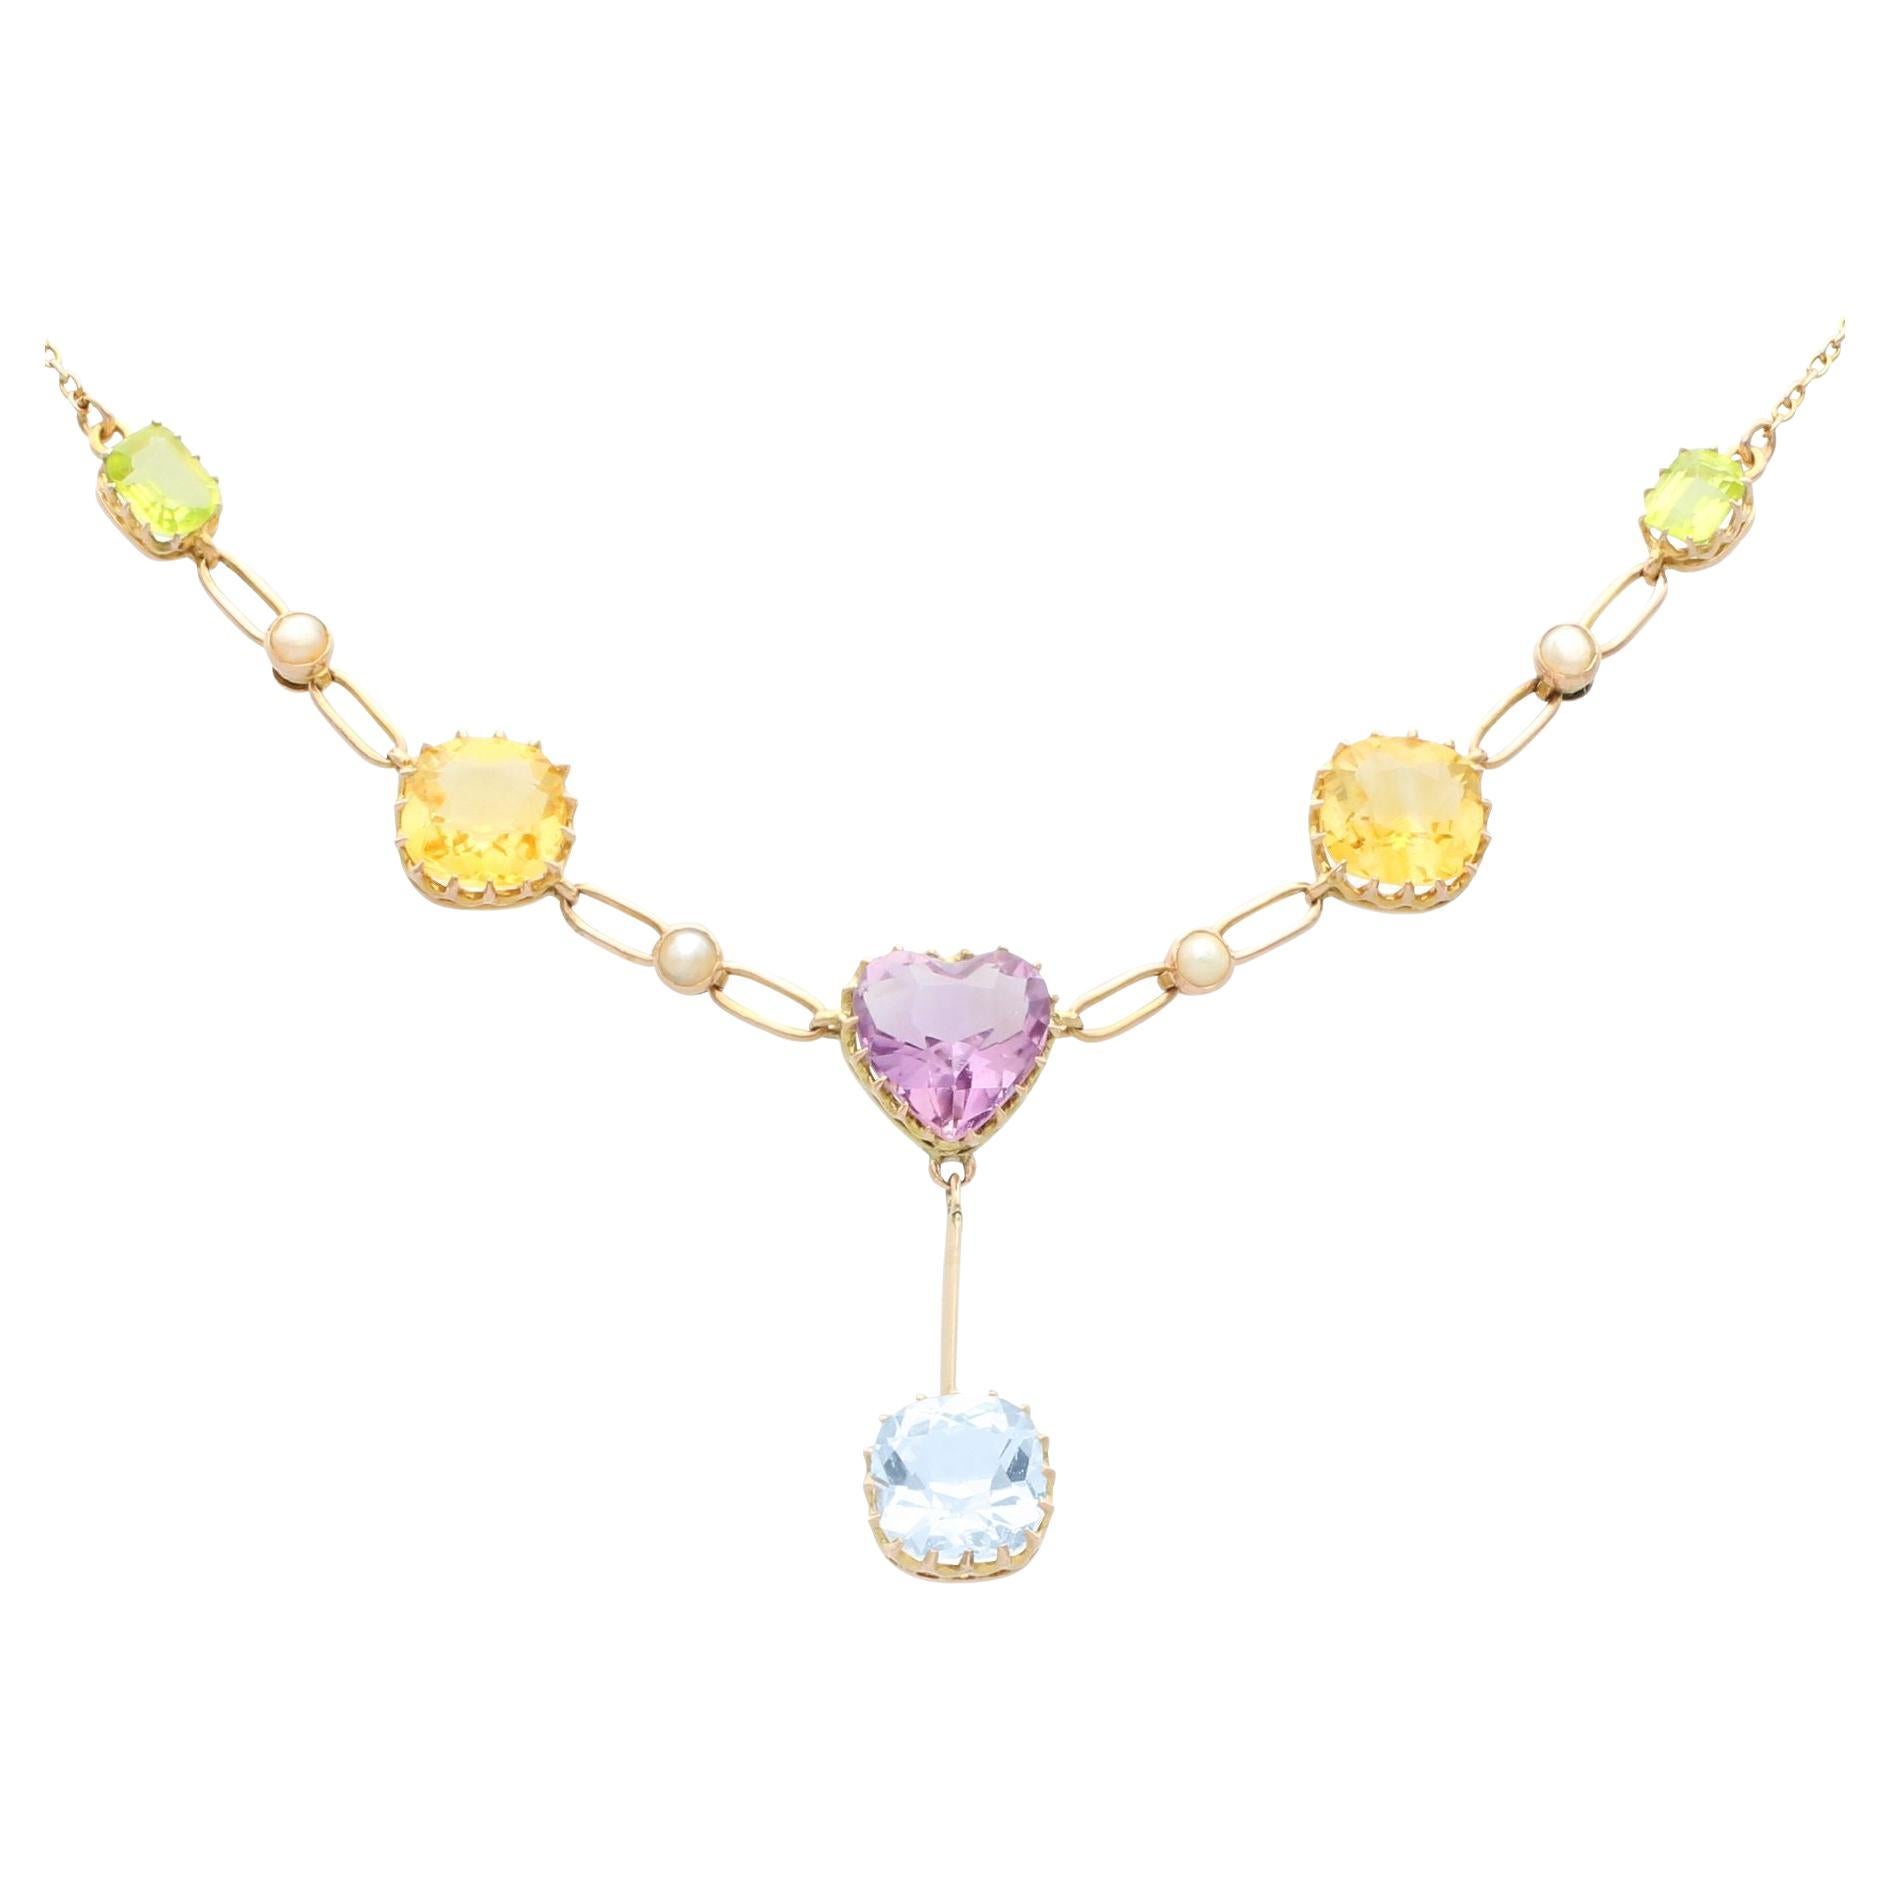 2.36ct Aquamarine, 3.72ct Citrine, 2.10ct Amethyst Peridot and Pearl Necklace For Sale